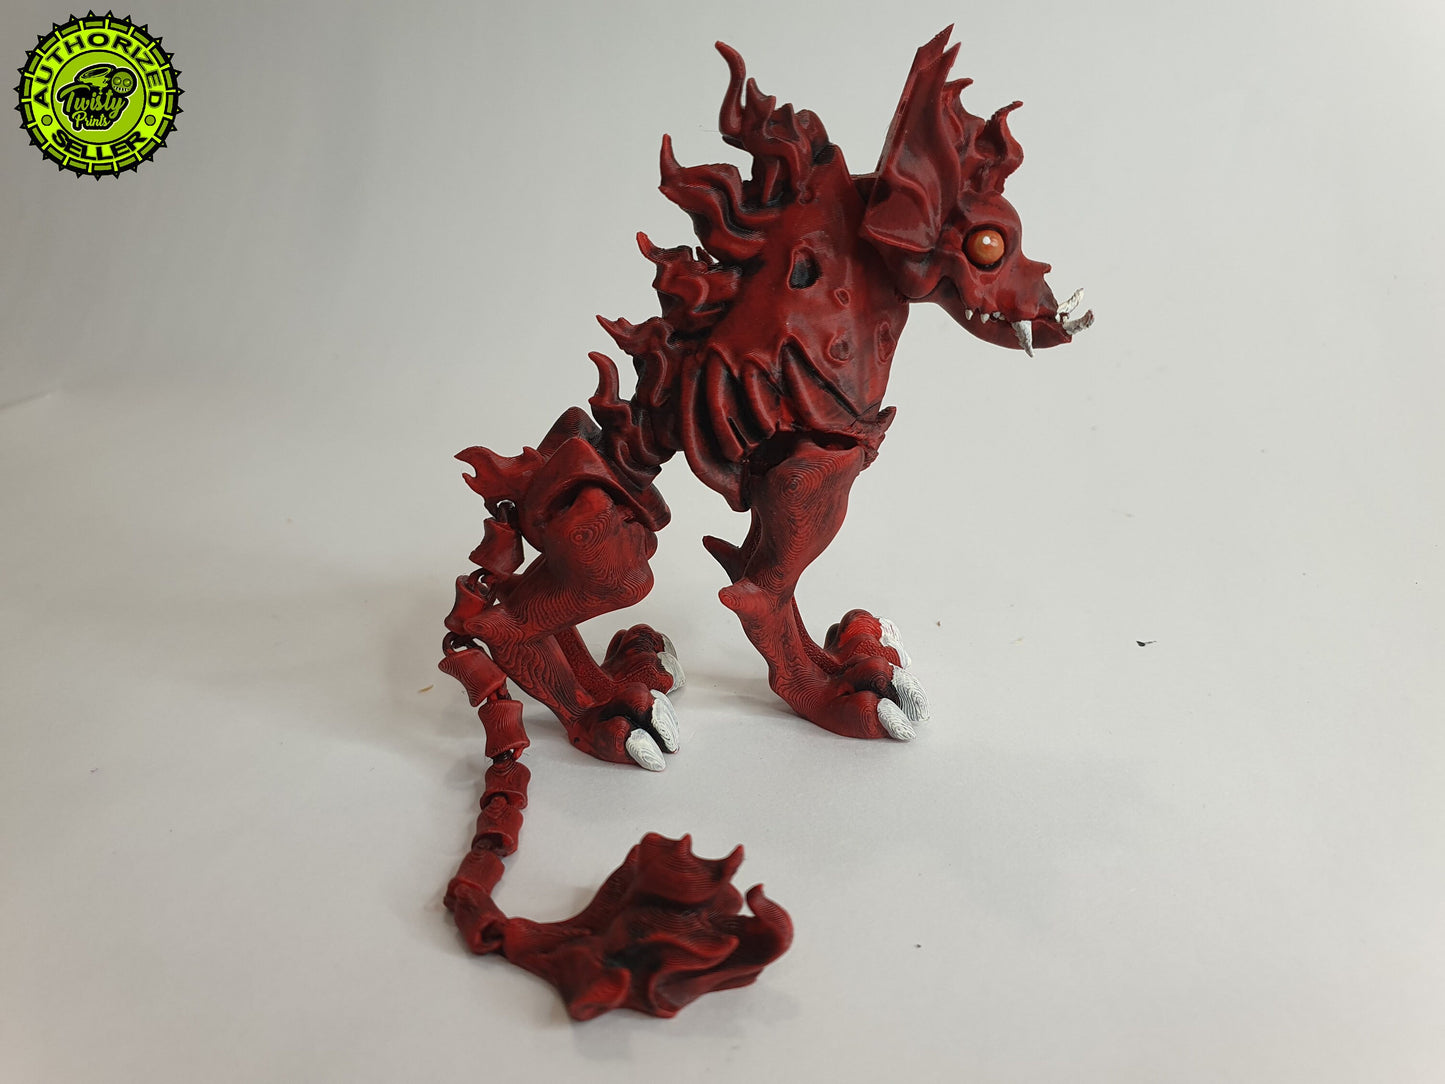 Good Boi Hellhound - Articulated Flexible 3D Print. Professionally Hand painted finishing details- can print in any colour you like